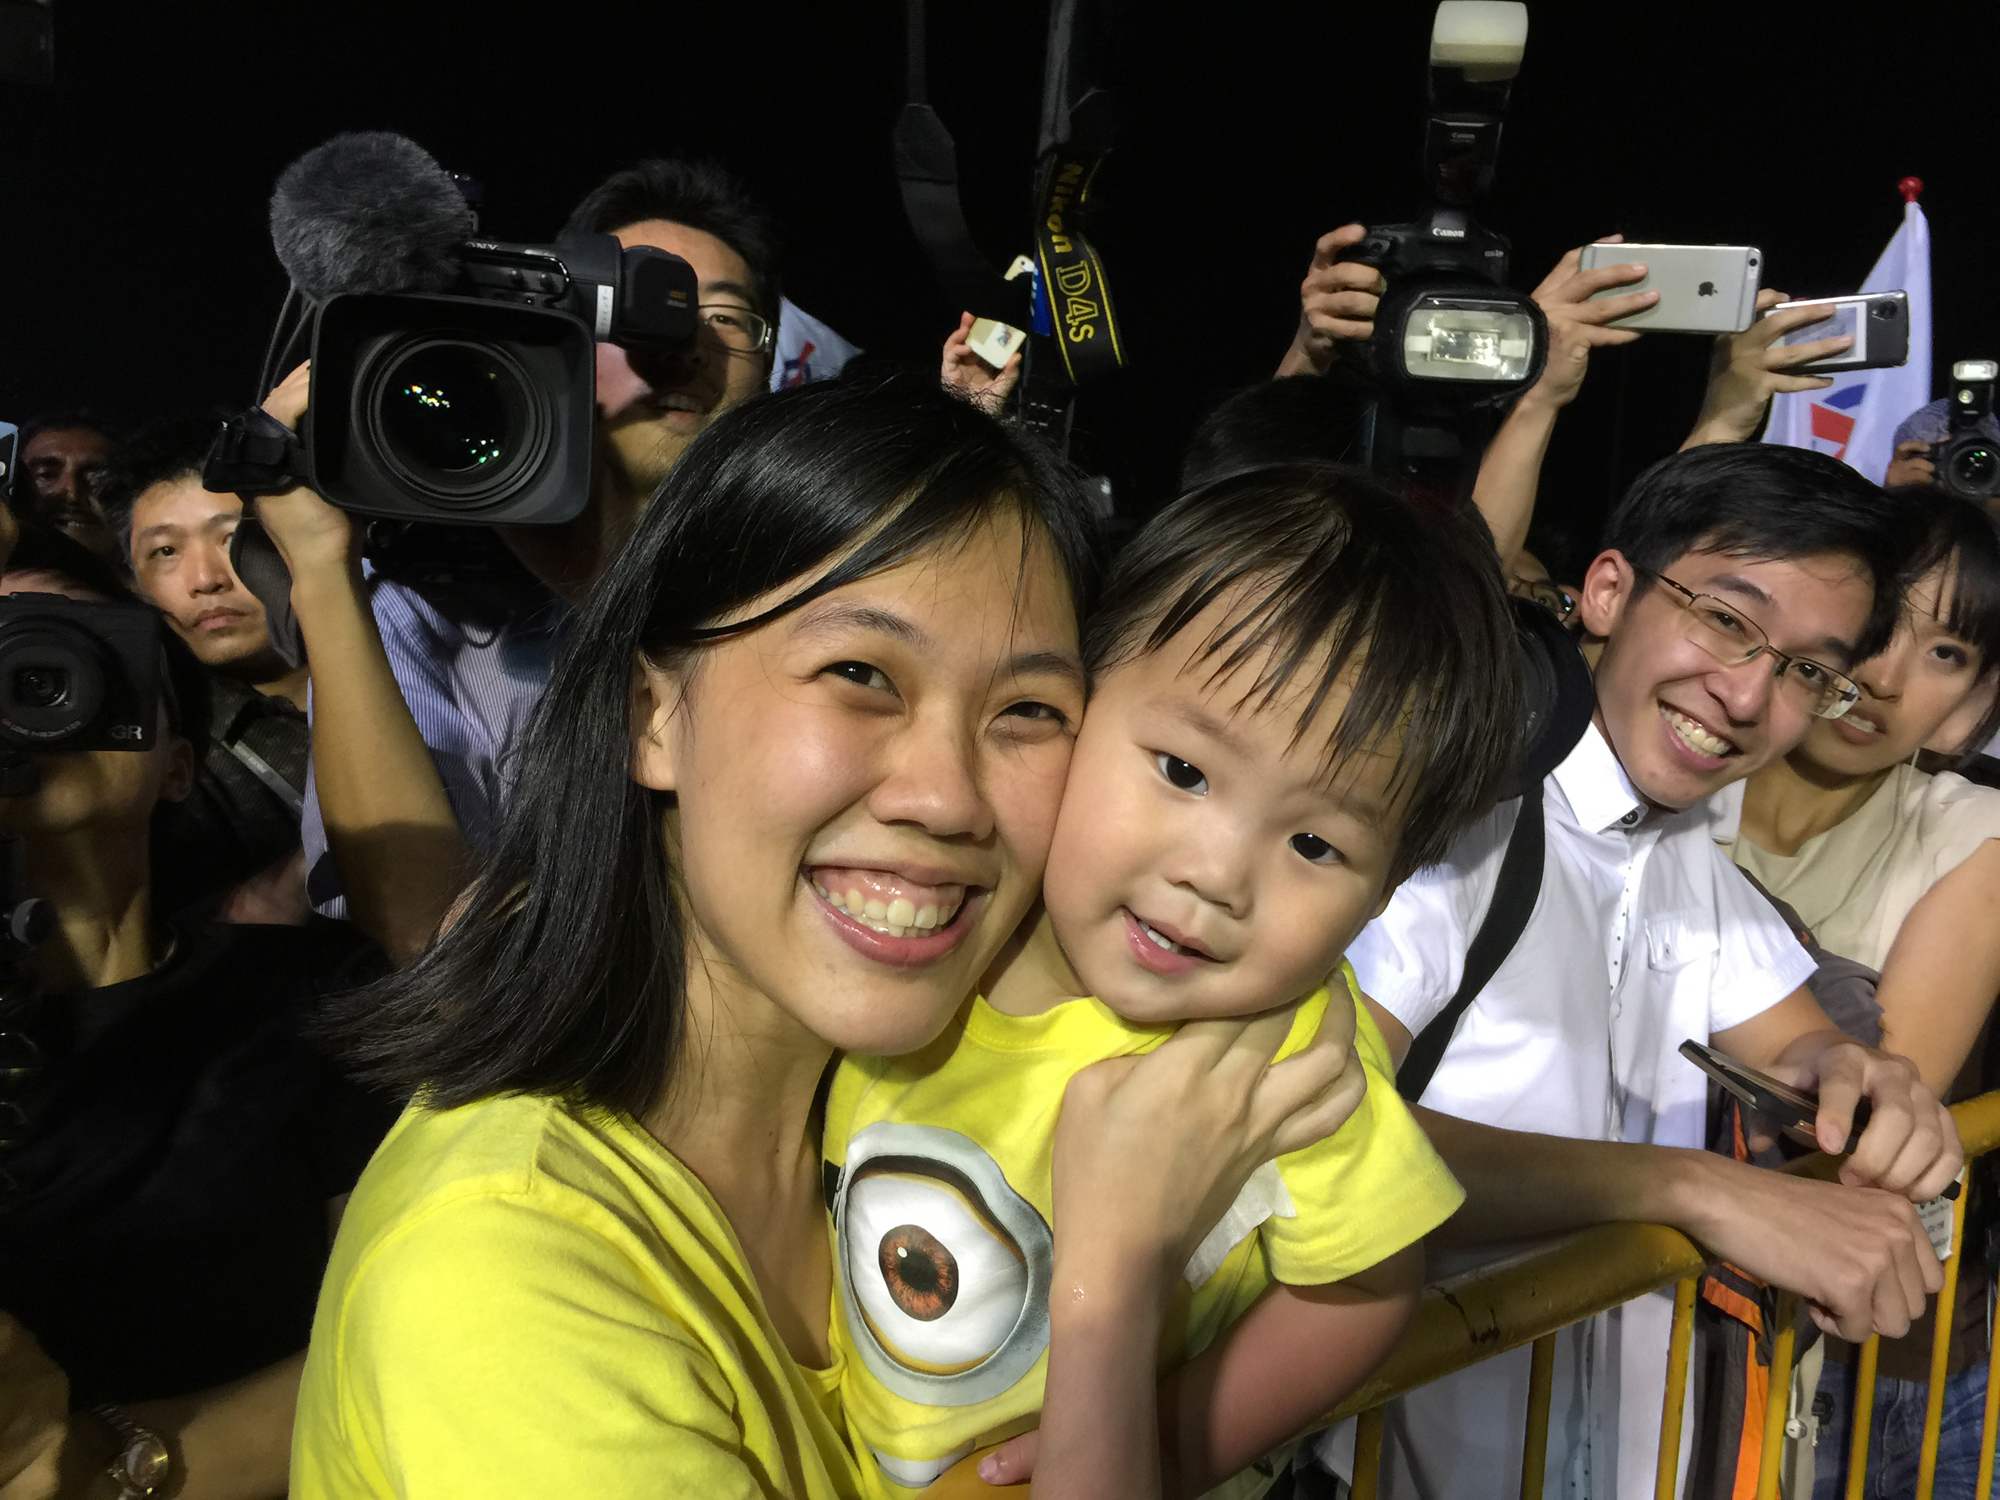 Supporter at Toa Payoh Stadium on Polling Day 13 Sep 15 (Photo by PM Lee Hsien Loong)